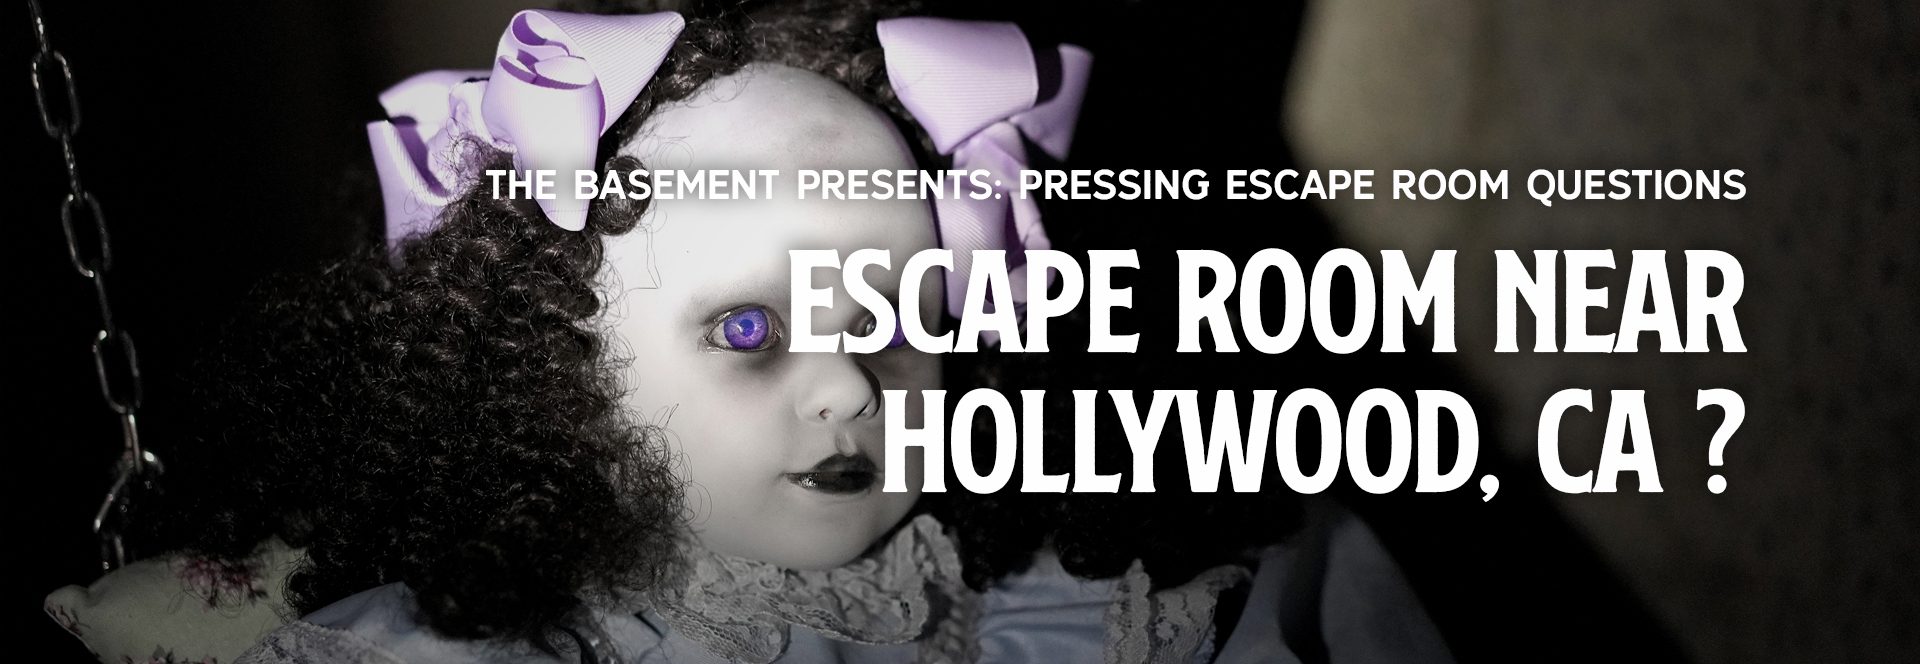 Escape Room in Hollywood, CA